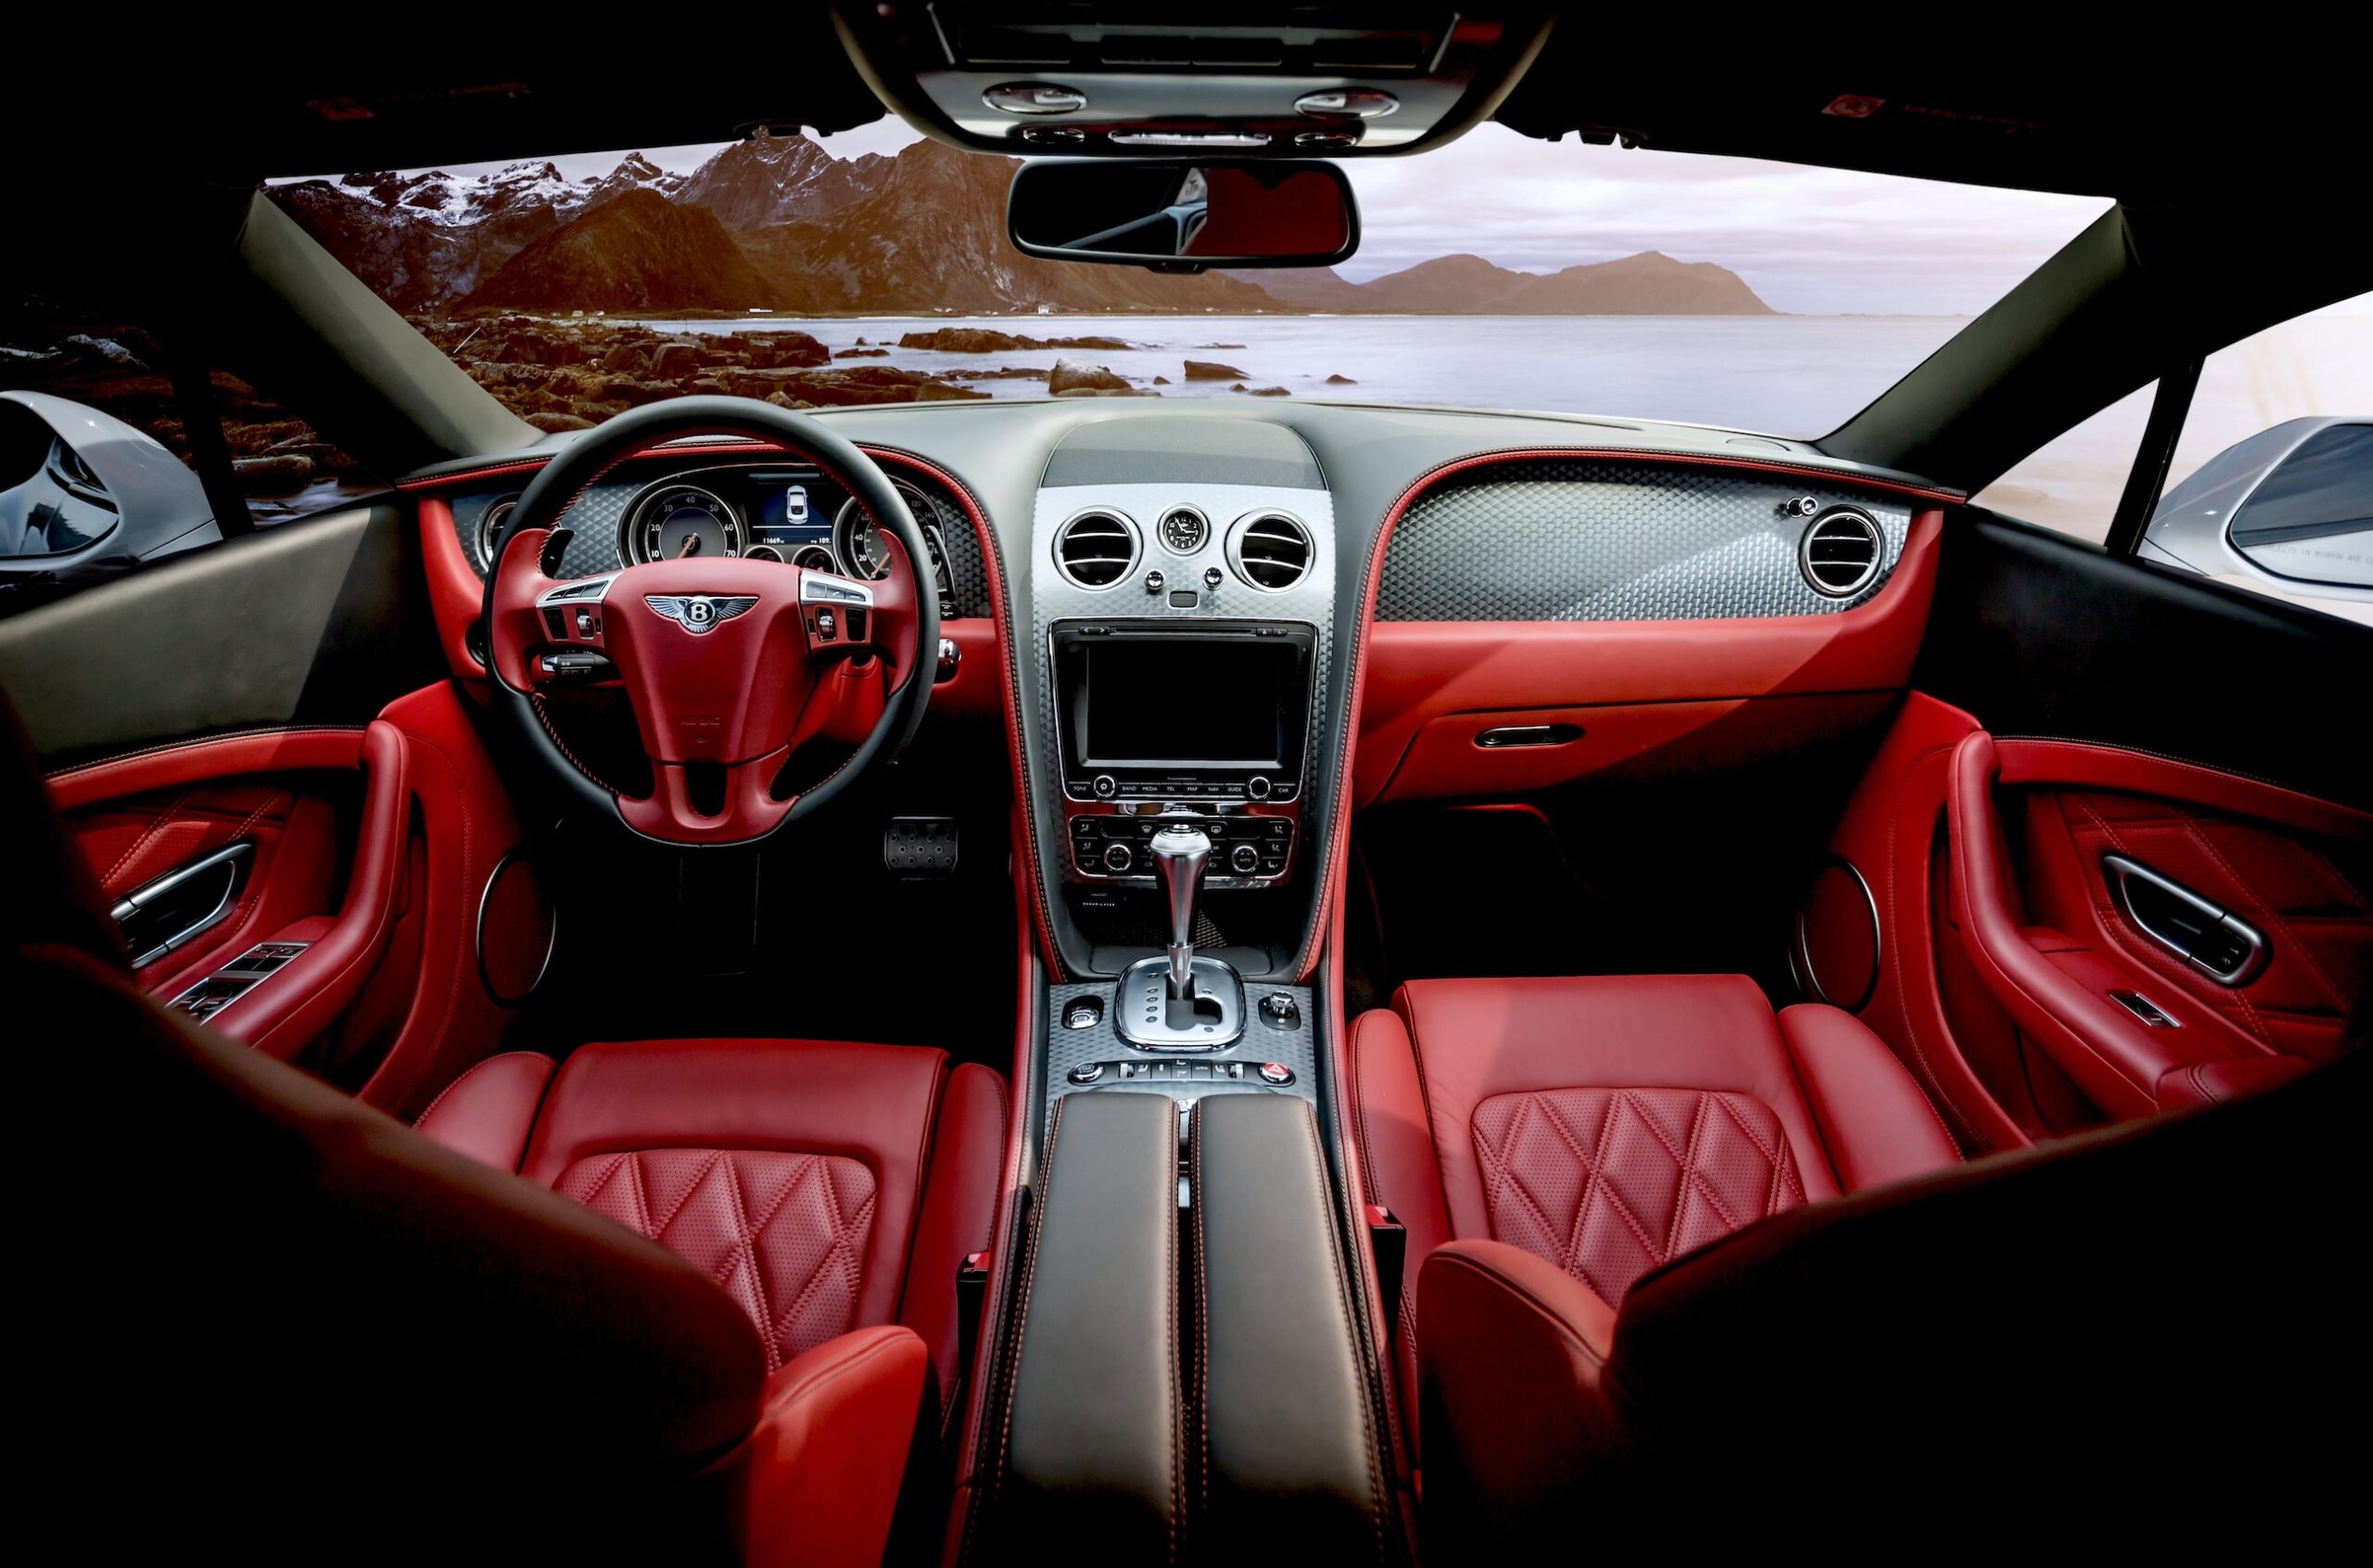 The red leather interior of a beautiful Bentley automobile, looking out onto an ocean front view